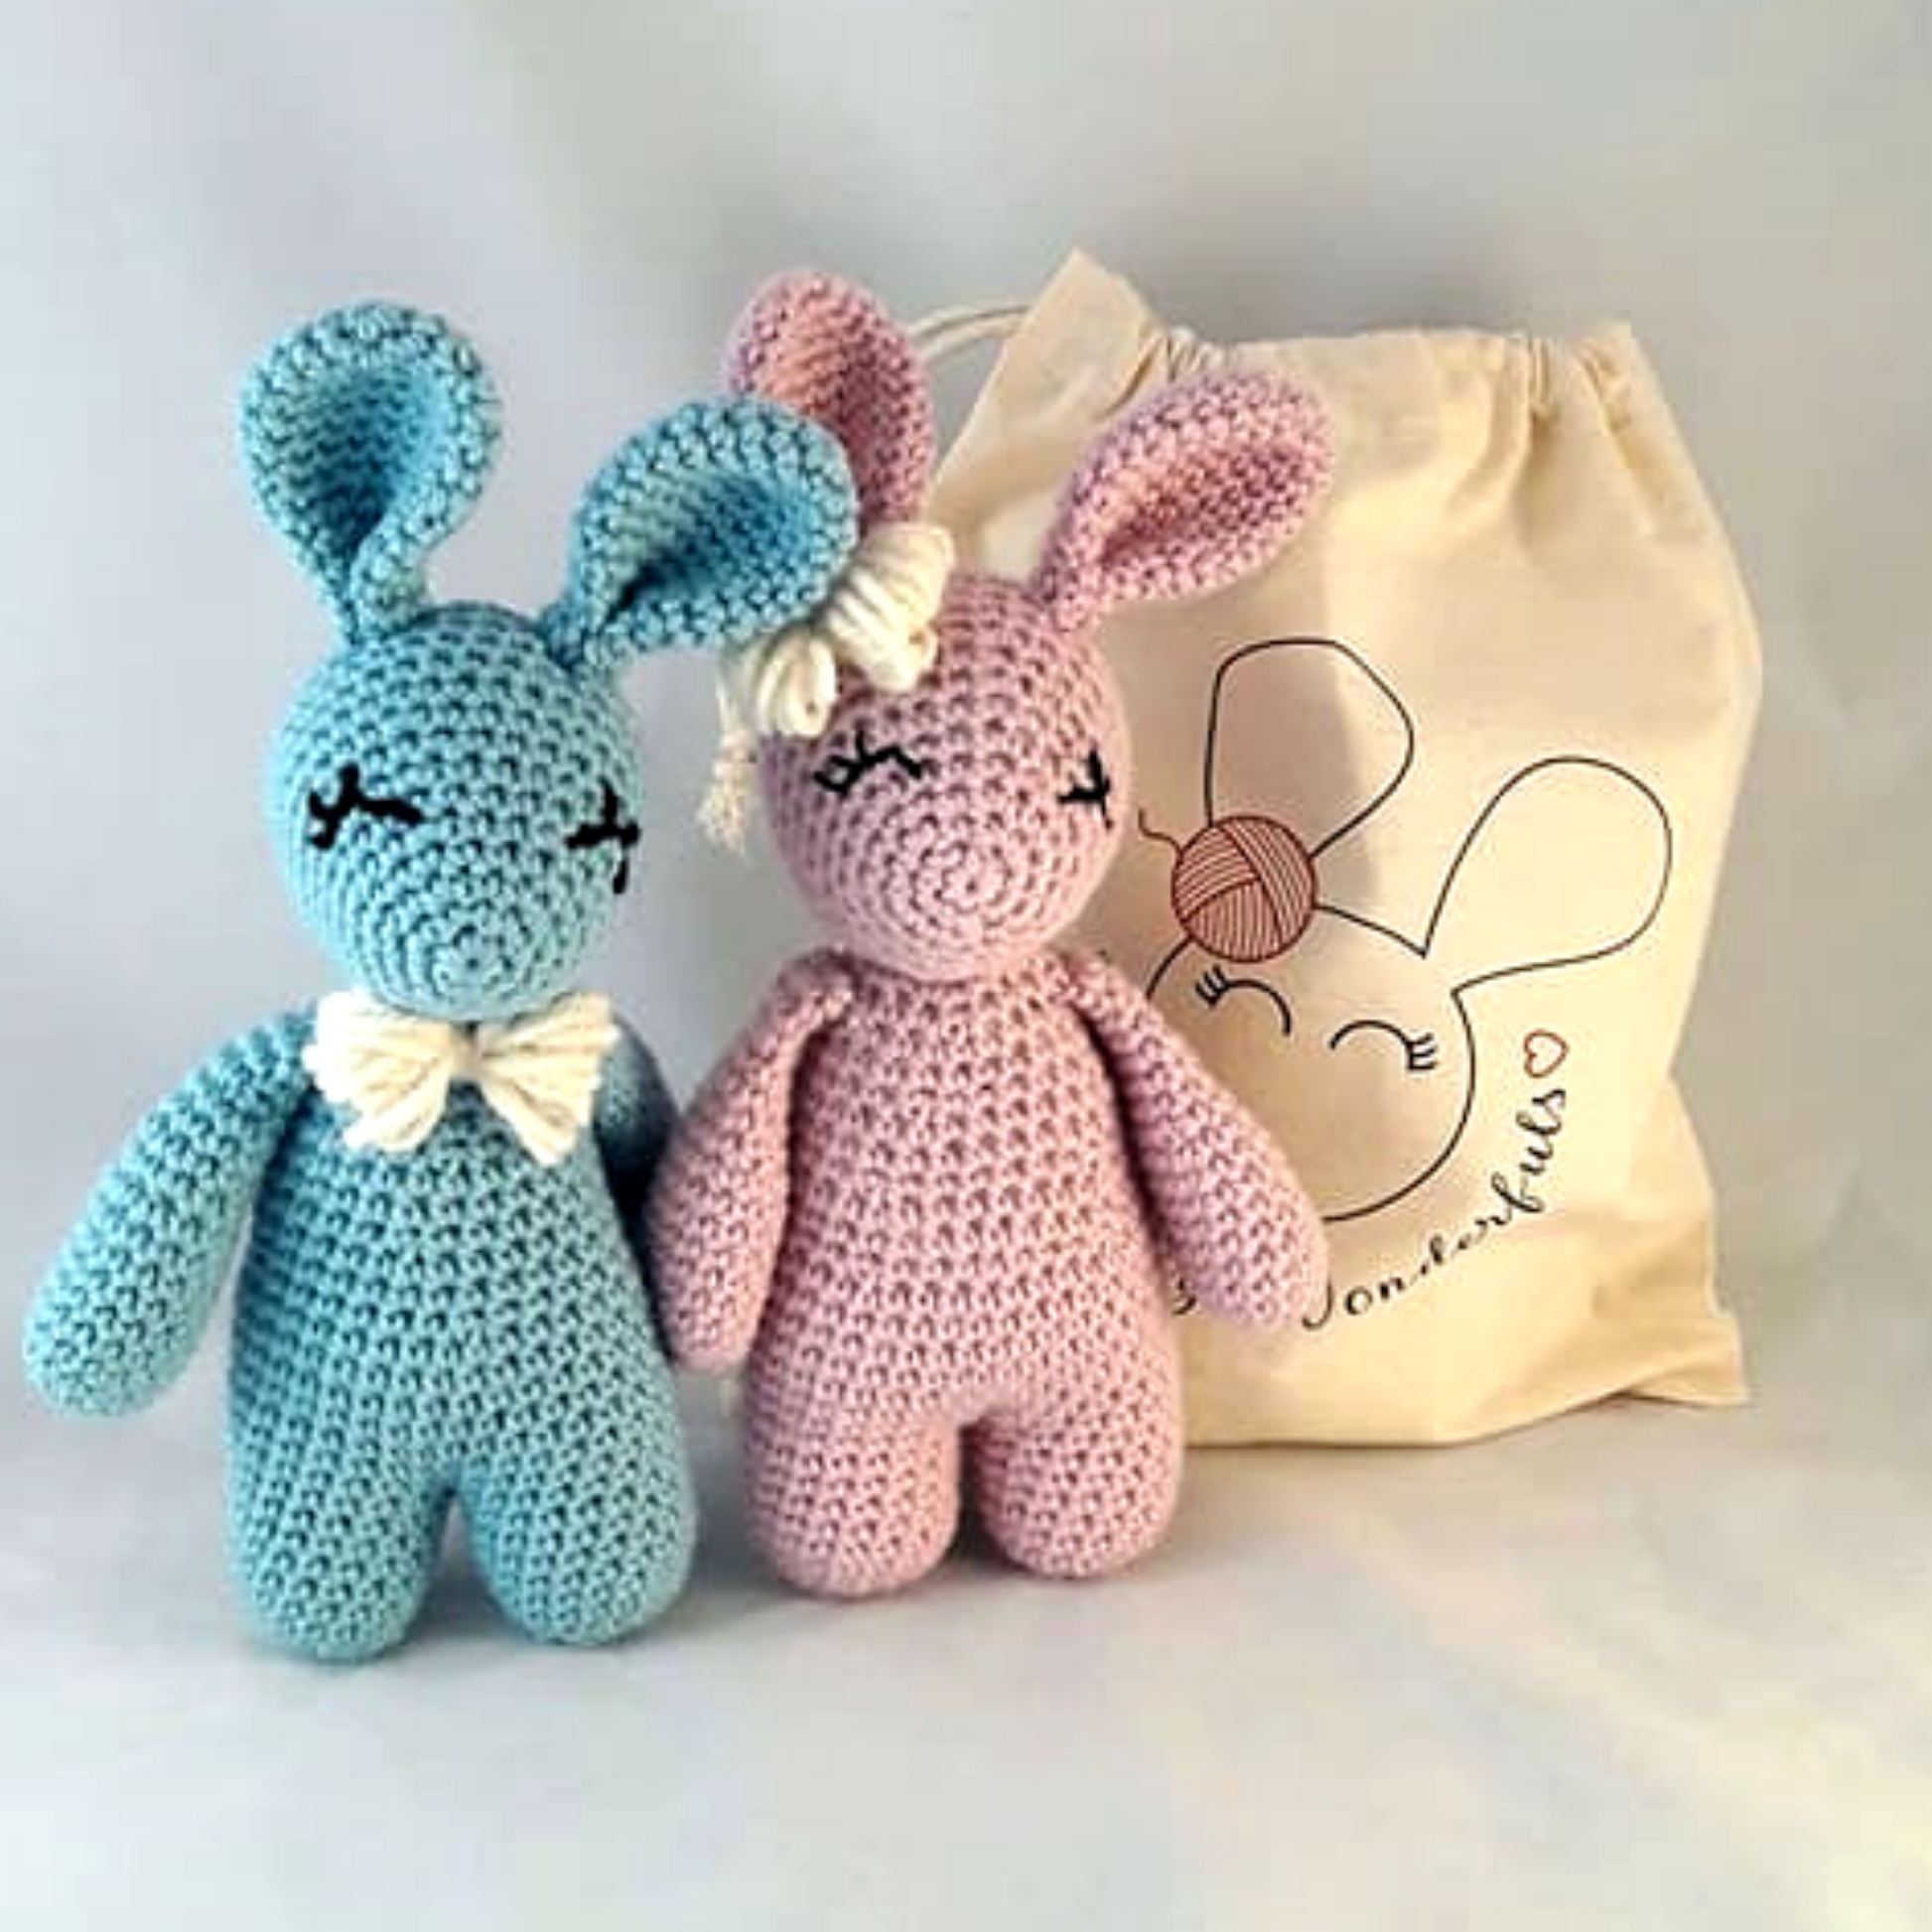 Boy and Girl Crochet Rabbits next to project bag